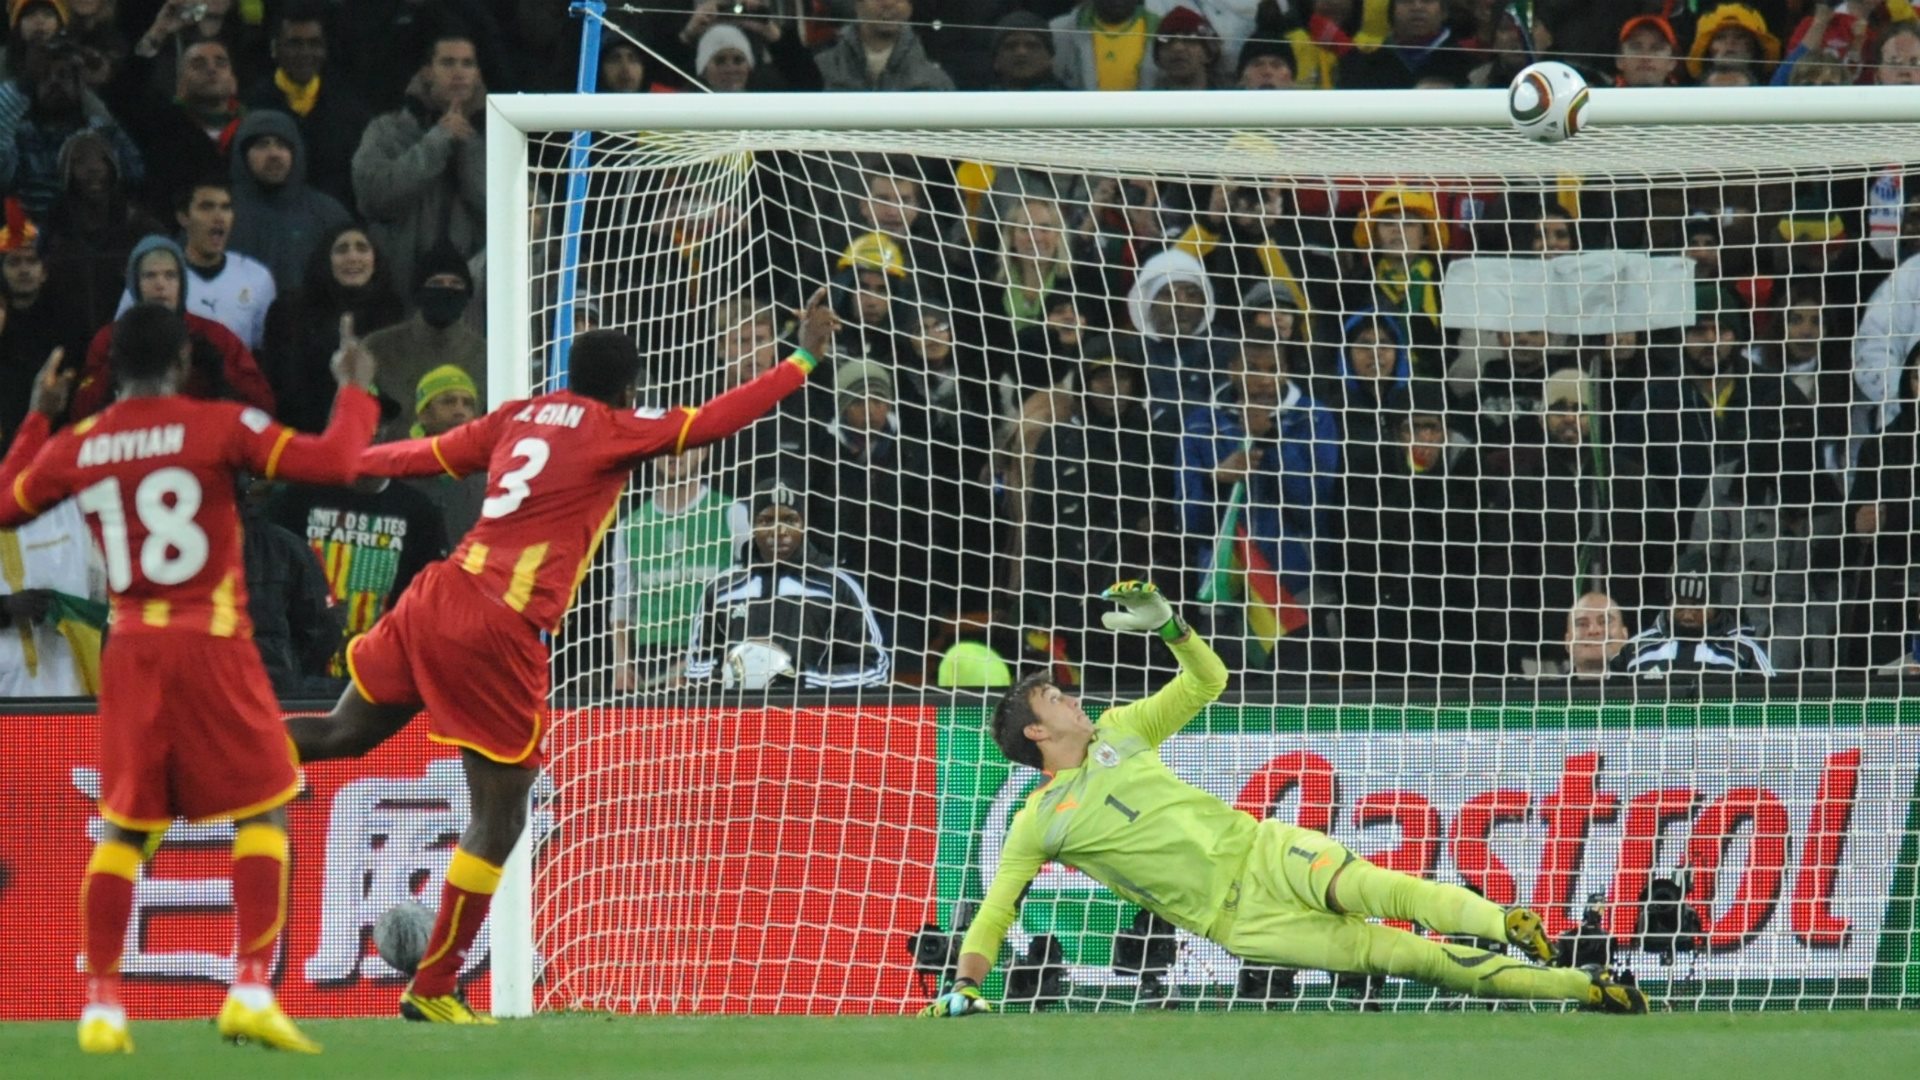 Asamoah Gyan will never forget that moment when he hit the crossbar from a penalty kick that could have consigned him to the history of African football